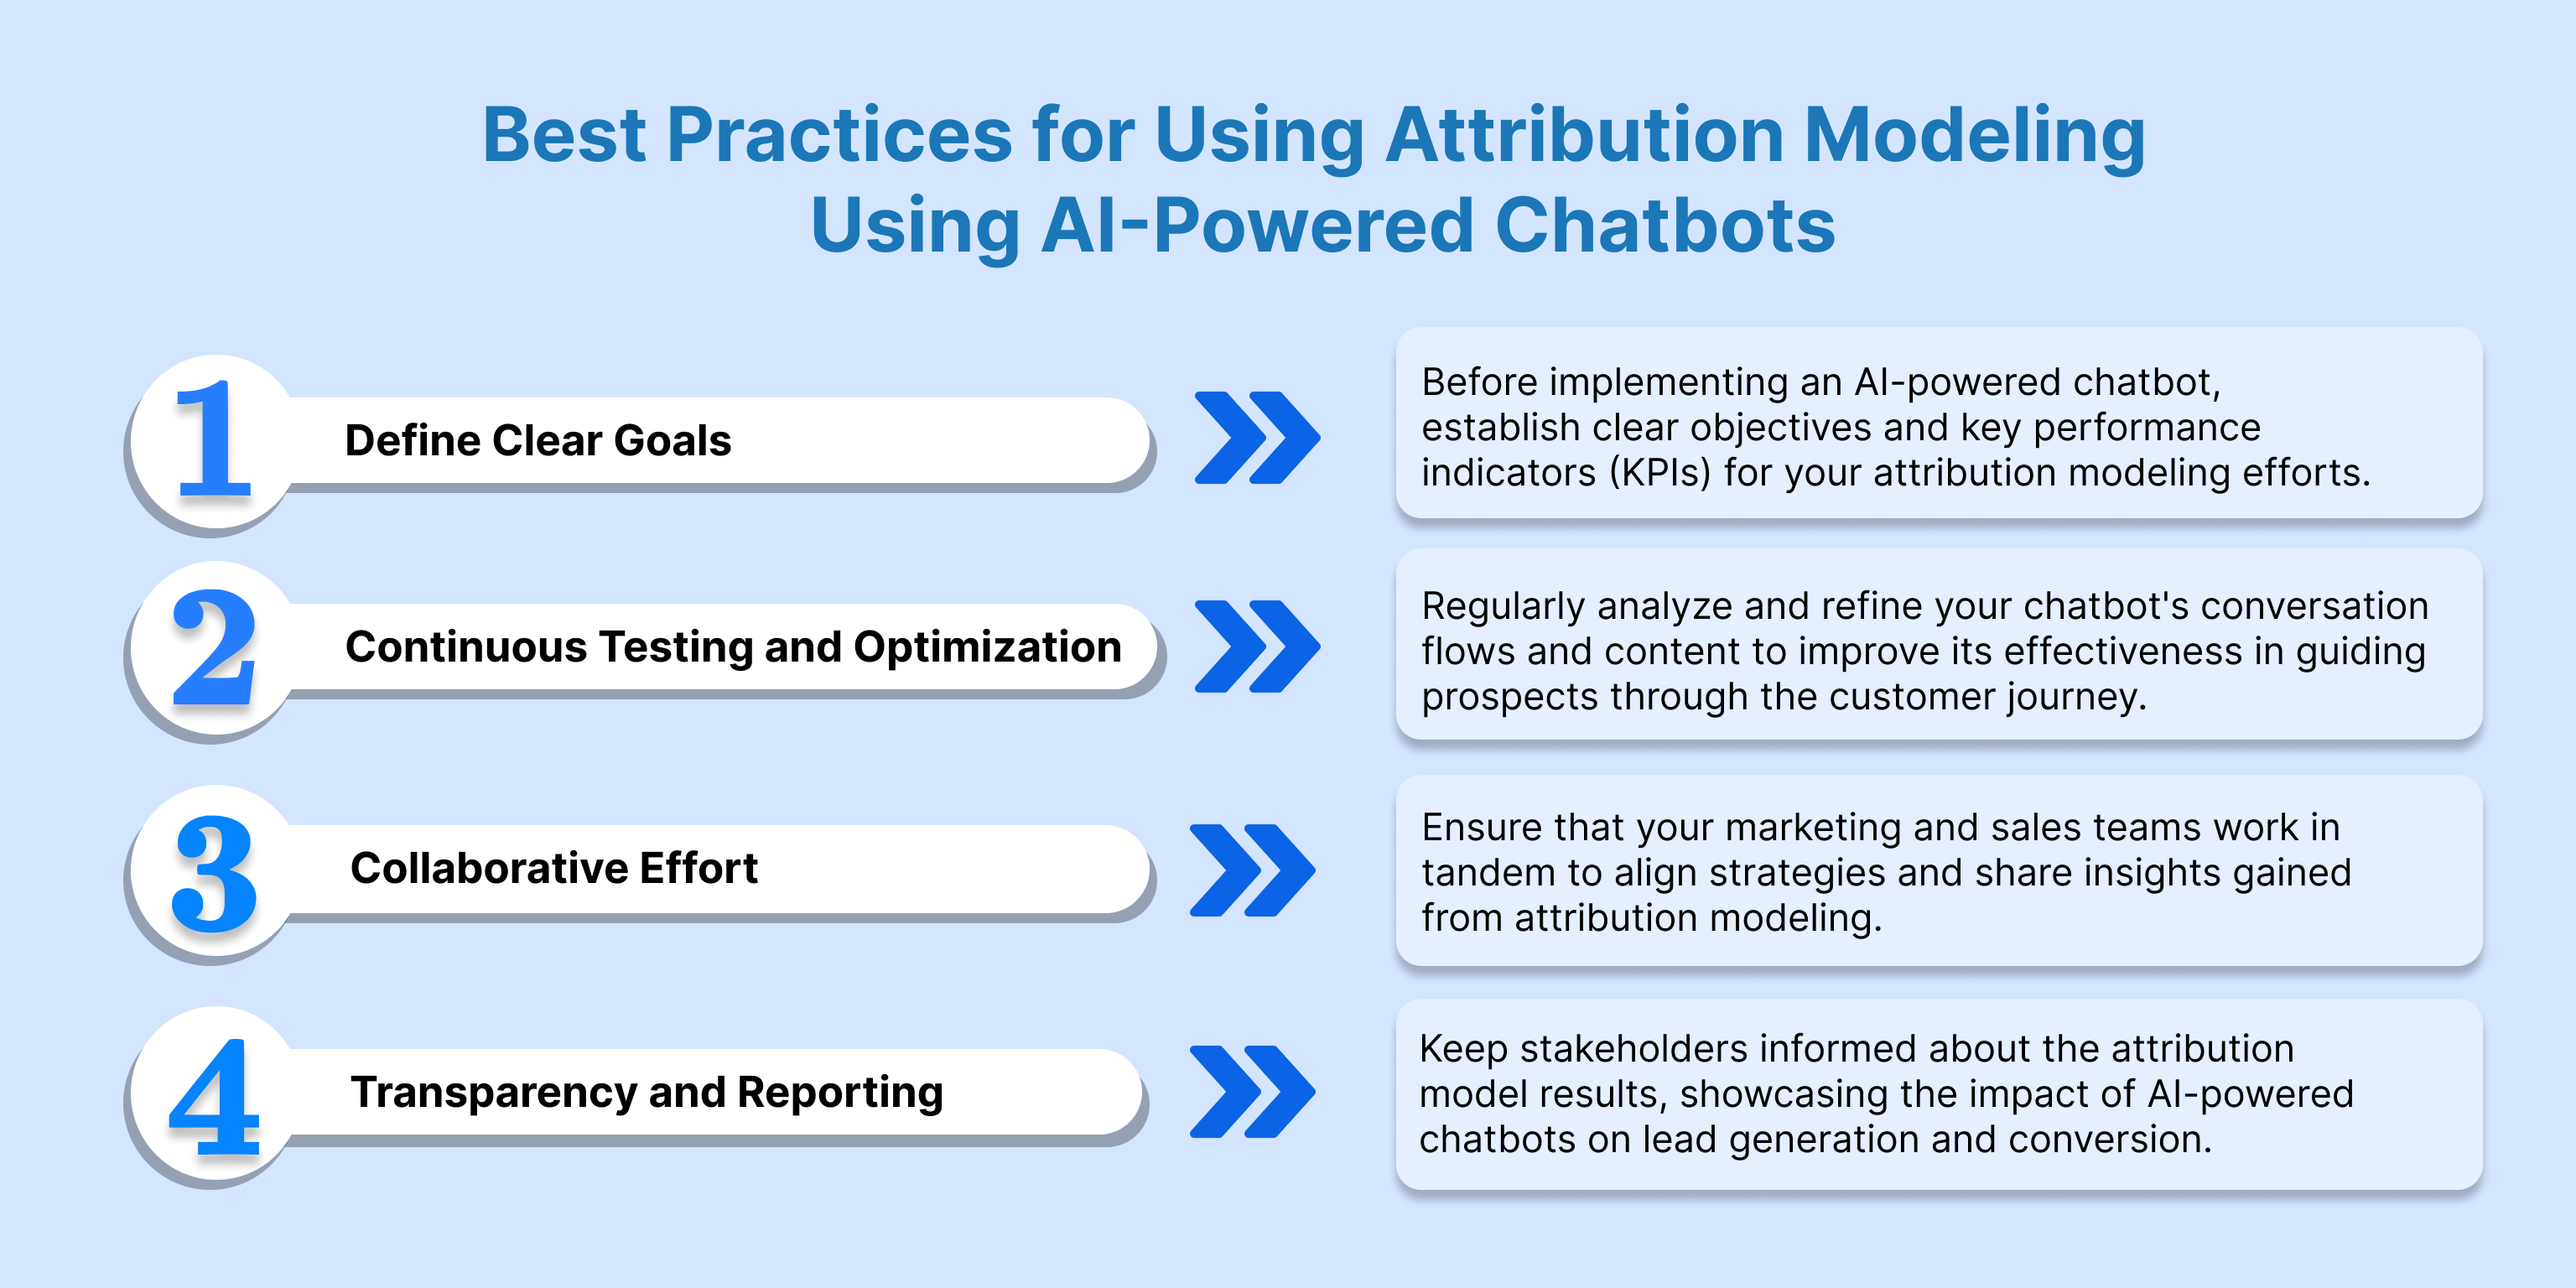 Best Practices for Using Attribution Modeling Using AI-Powered Chatbots